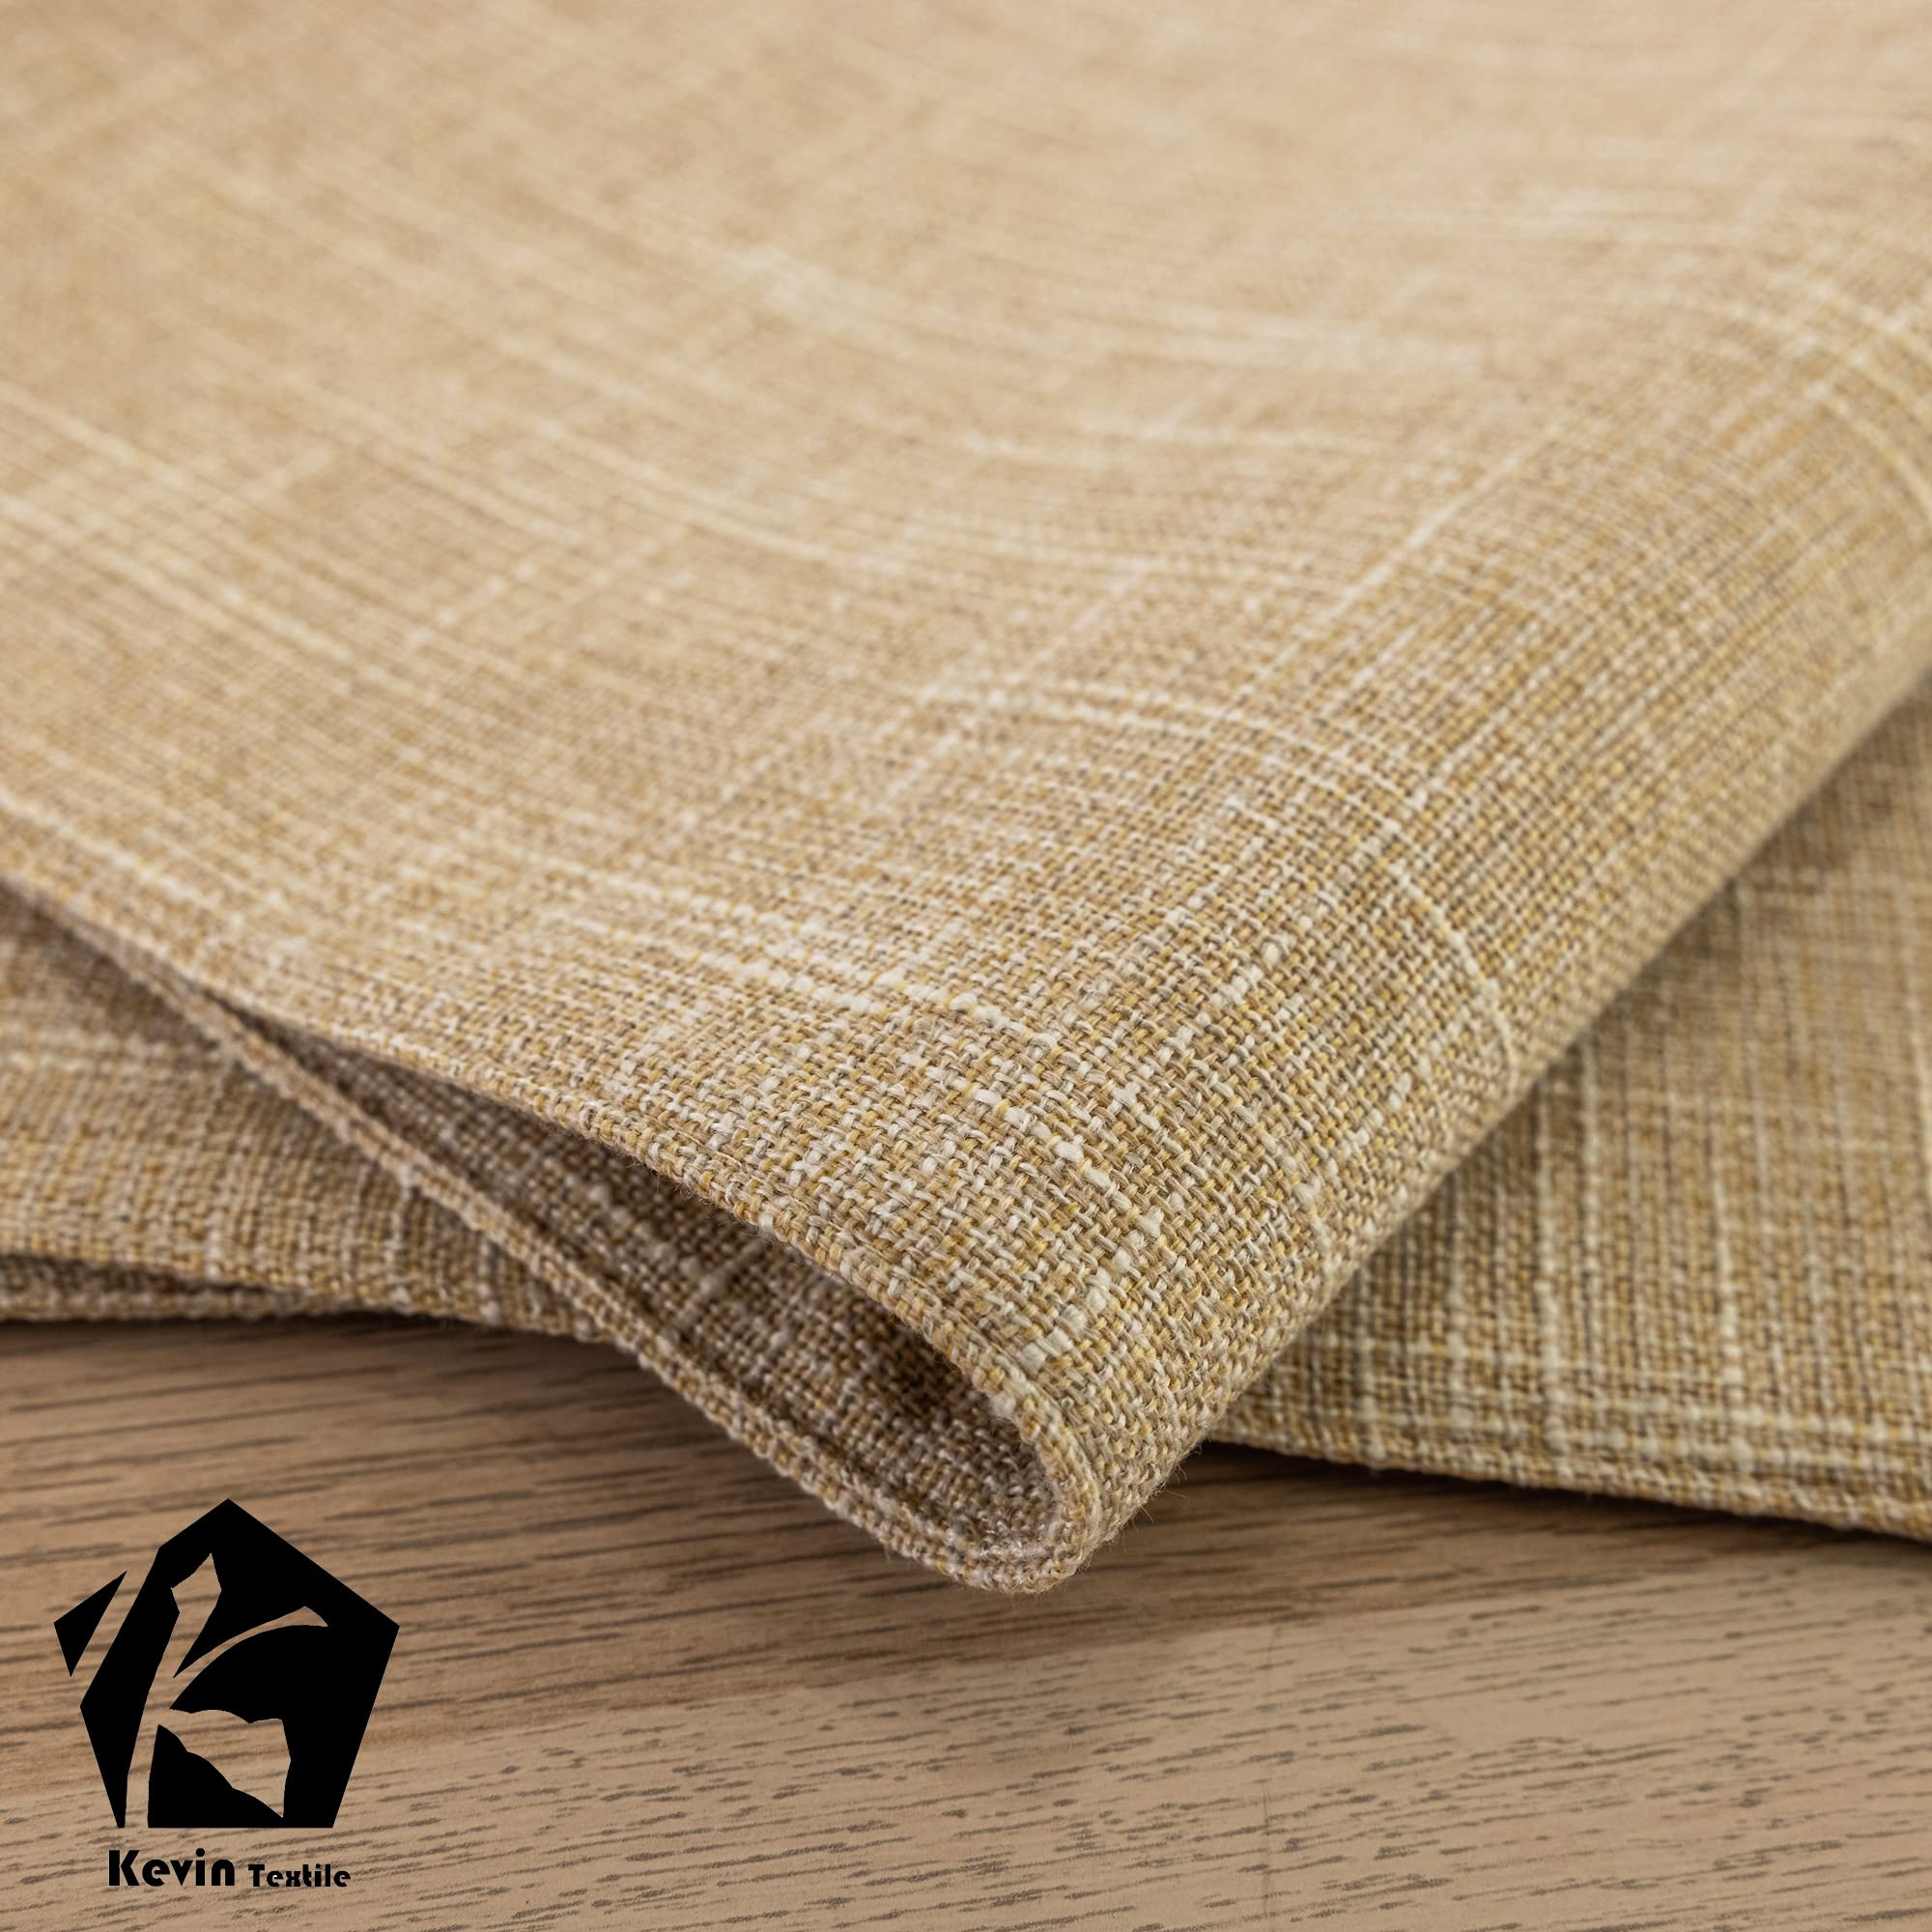 Kevin Textile Burlap Linen Placemats Set of 4 Heat Resistant Dining Table Place Mats Washable Kitchen Table Mats, 13 x19 inches, Cream Beige